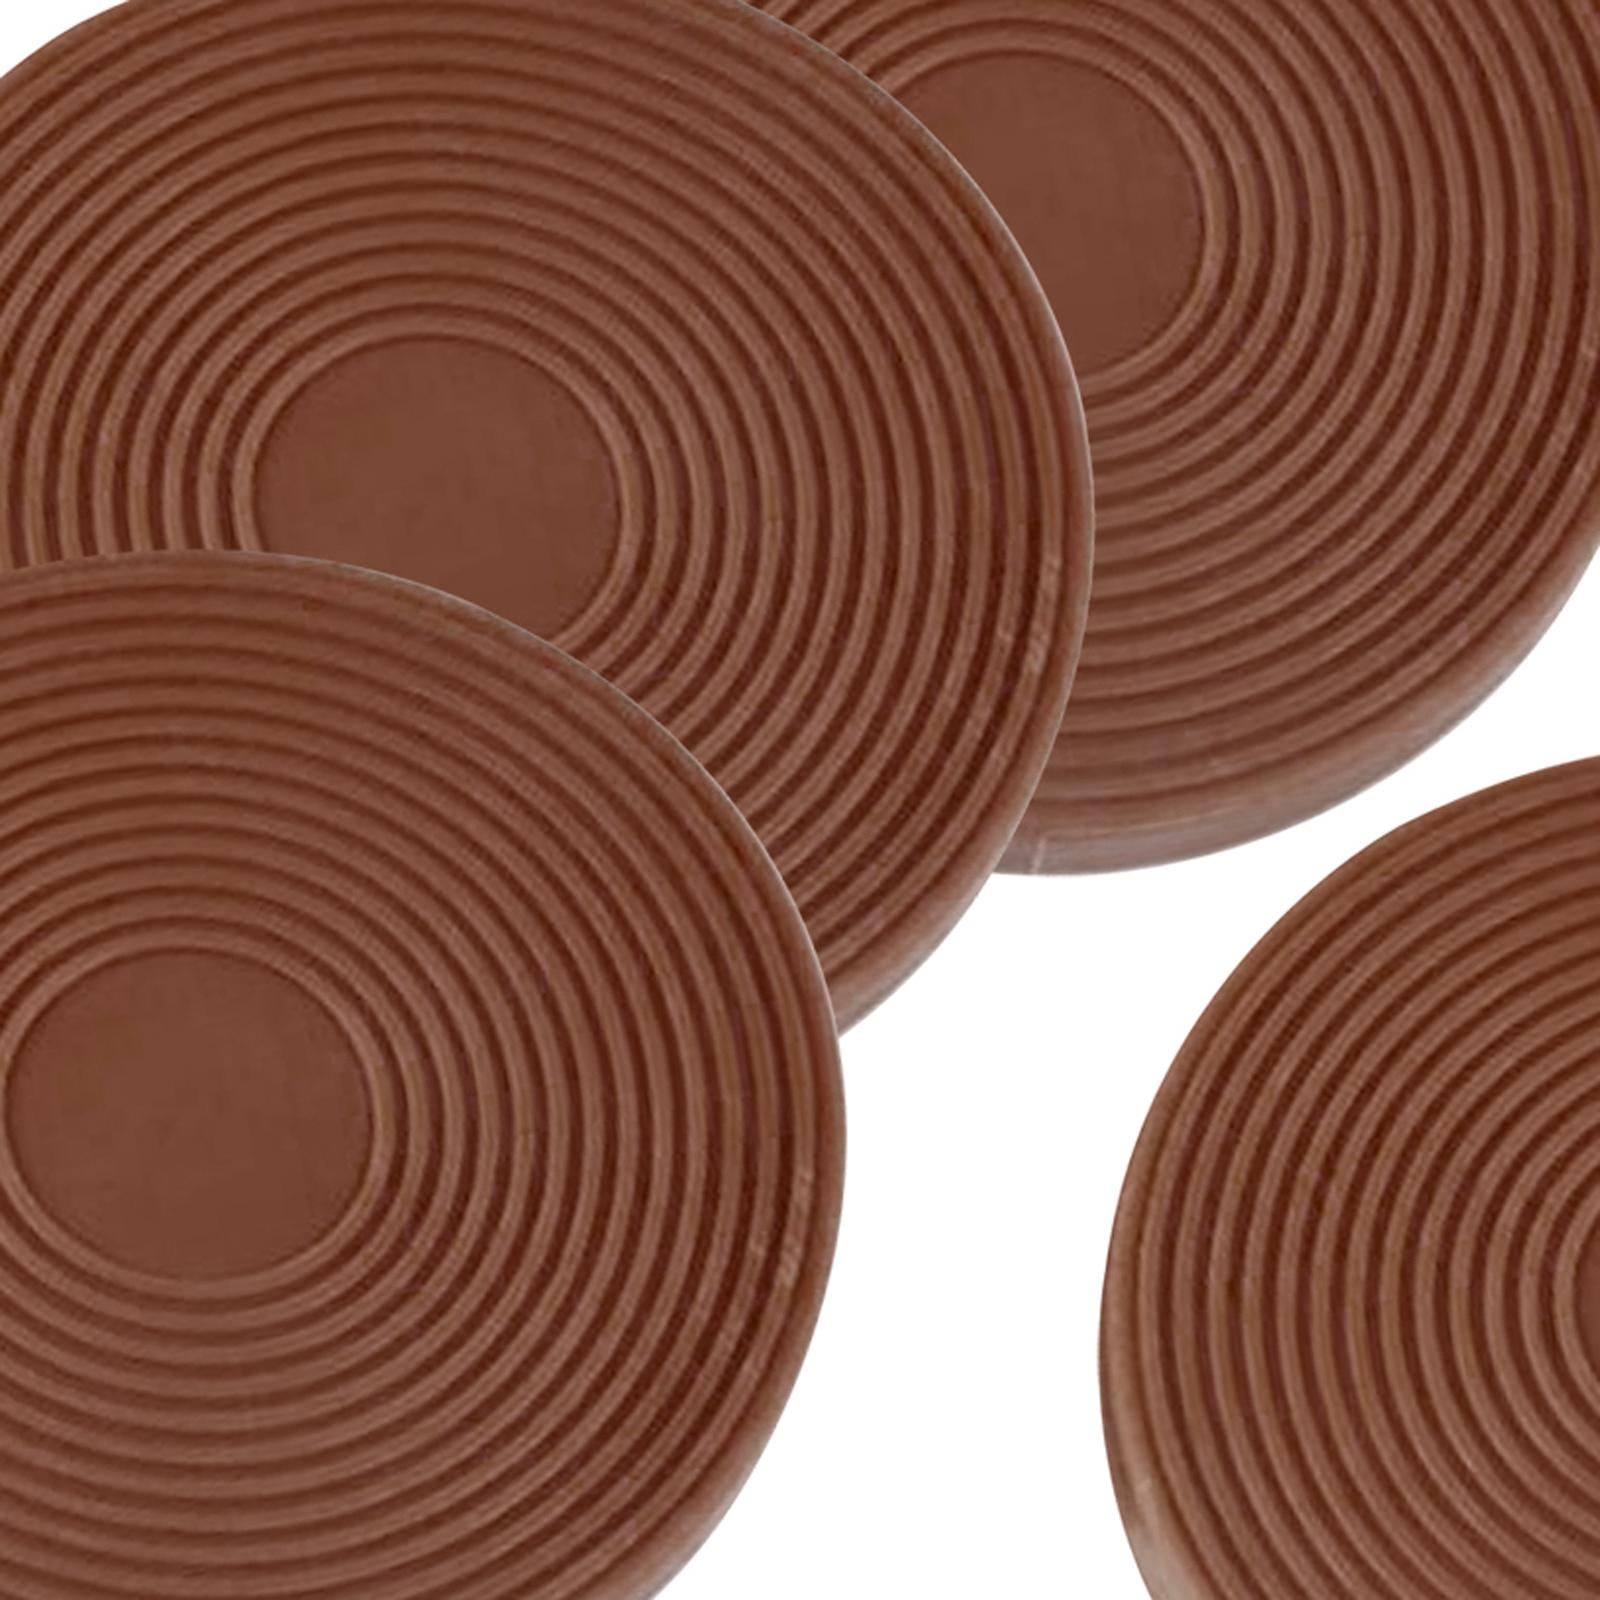 Anti-Slip Furniture Gripper Cups Round Coasters 43mm for Sofa Bed Pianos Light Brown